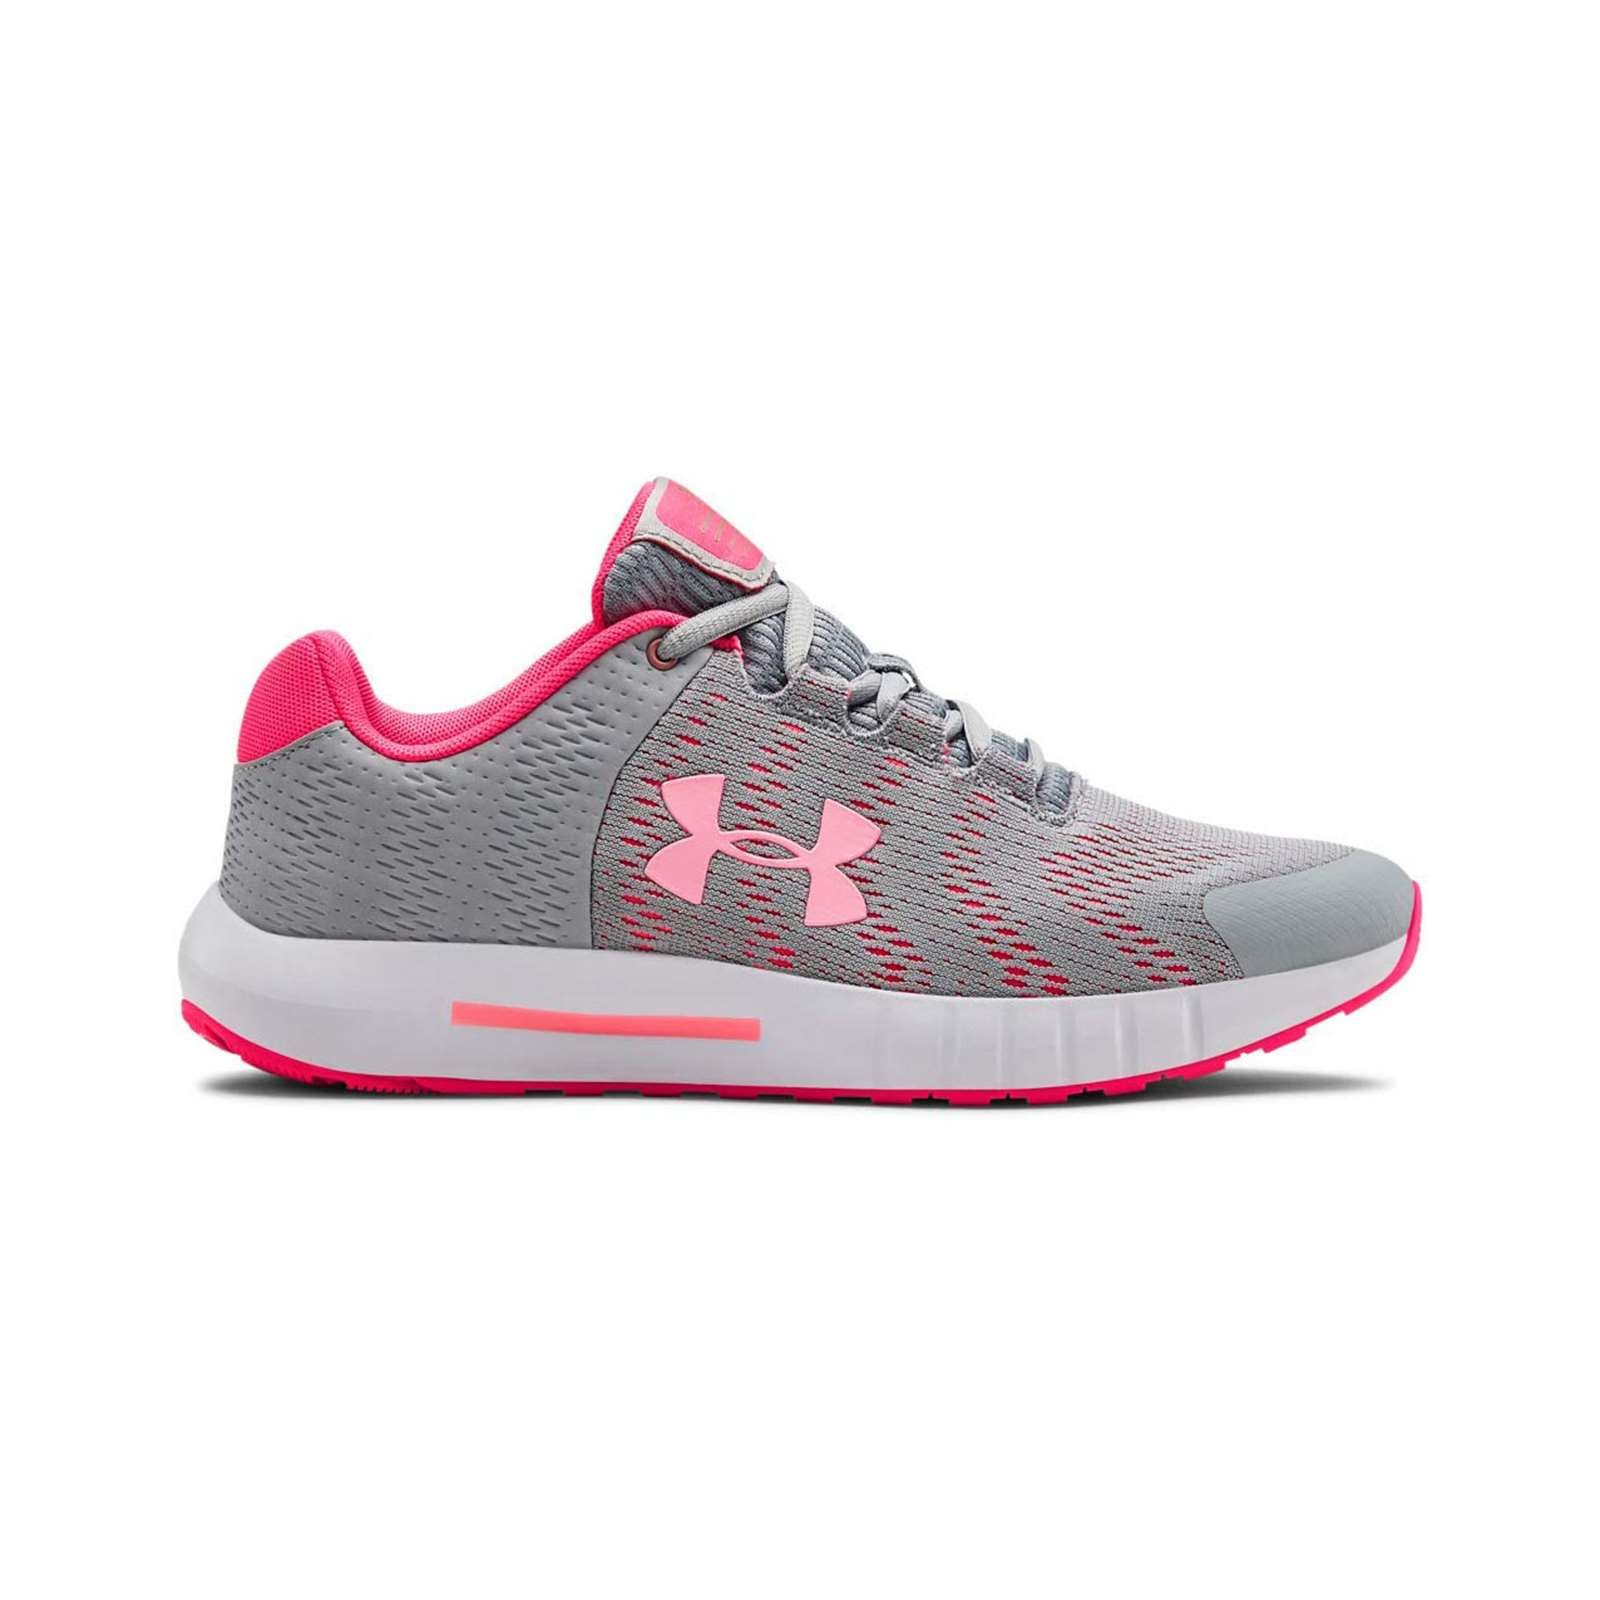 Under Armour Girls’ Grade School Pursuit Ng Running Shoes 